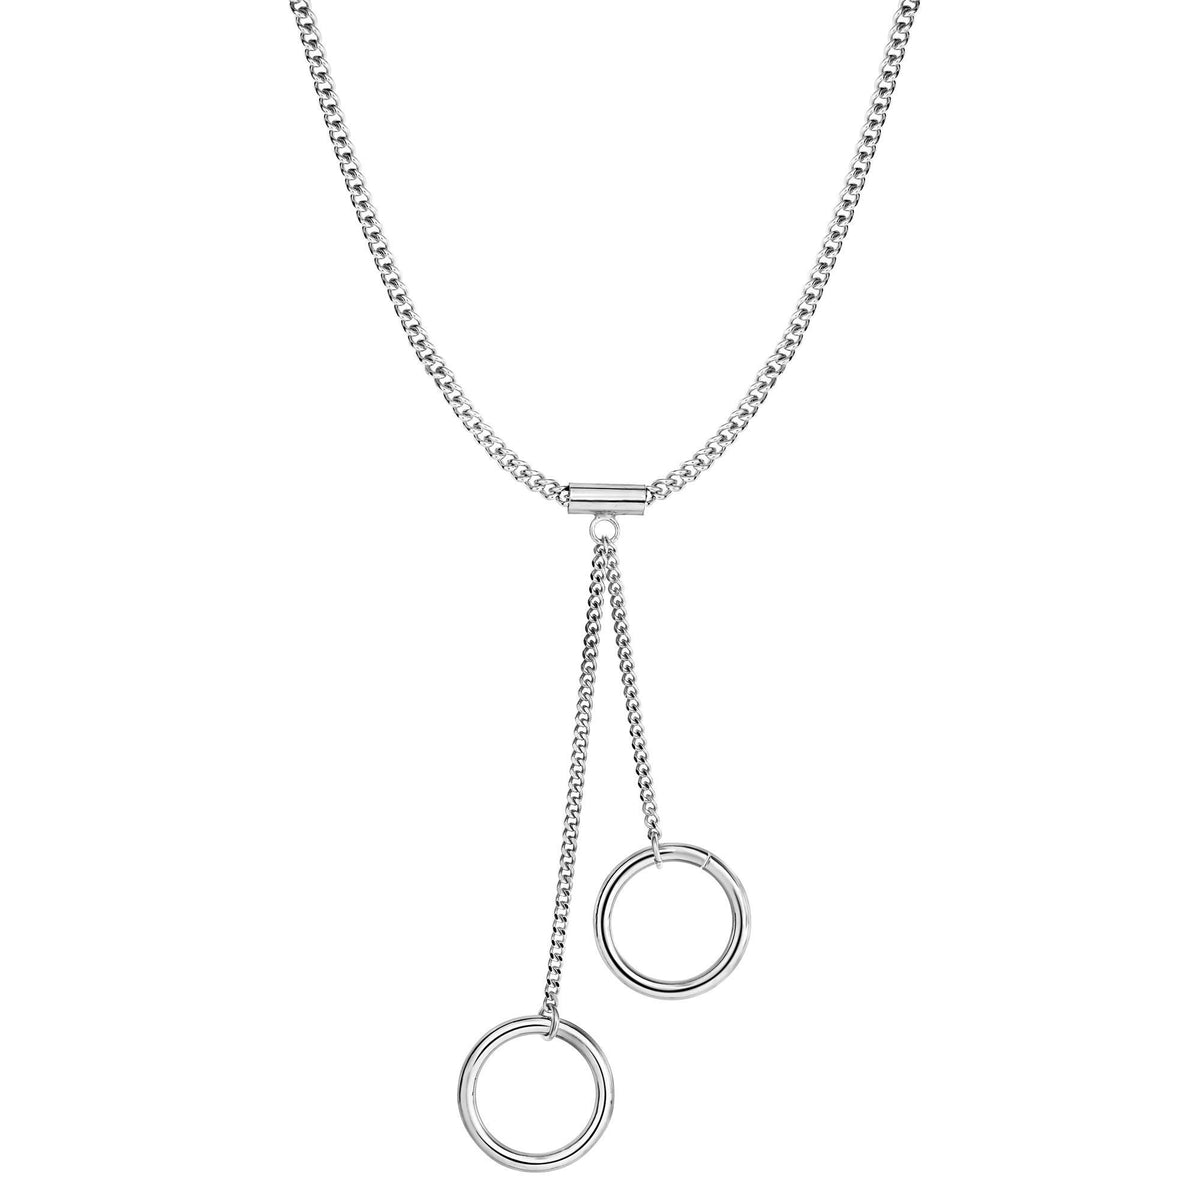 Sterling Silver Circle Charms Fancy Necklace, 28"